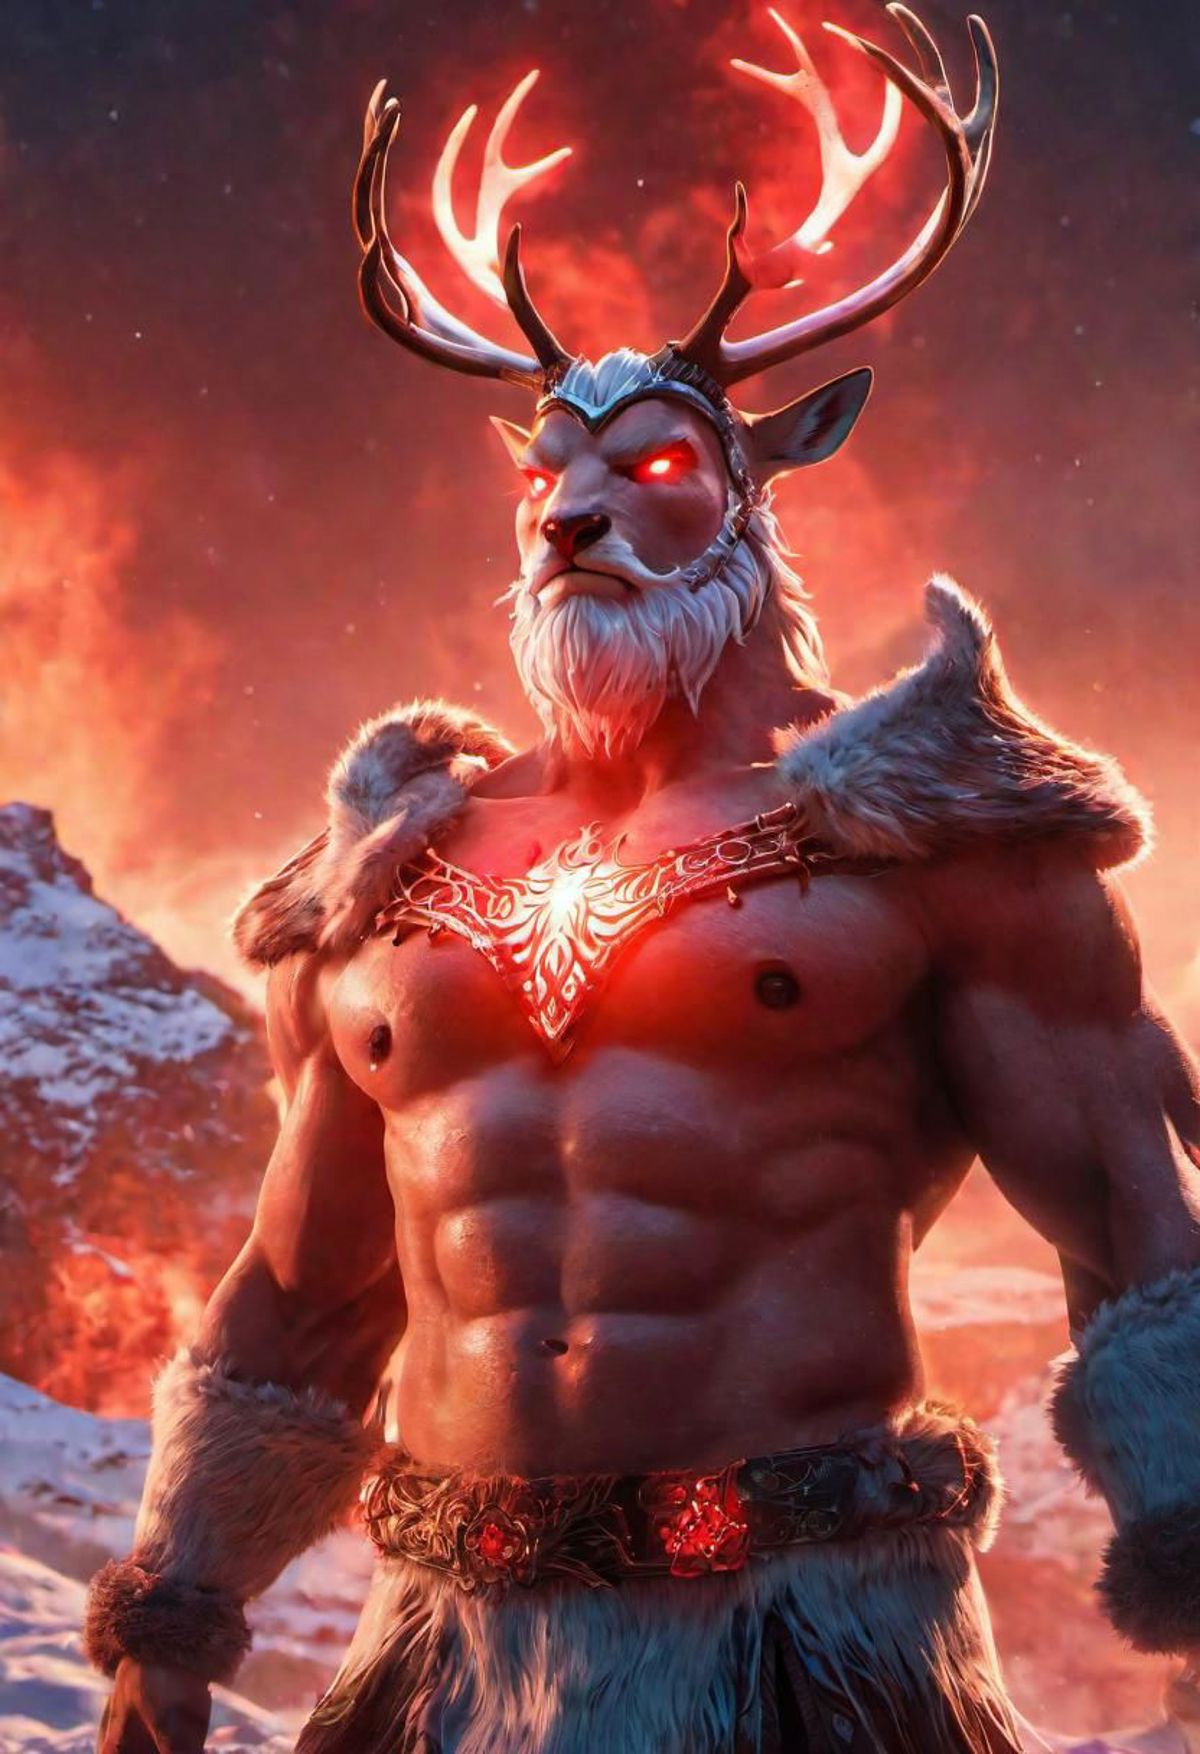 Muscular Man with Antlers, Beard, and Heart Decoration on His Chest.